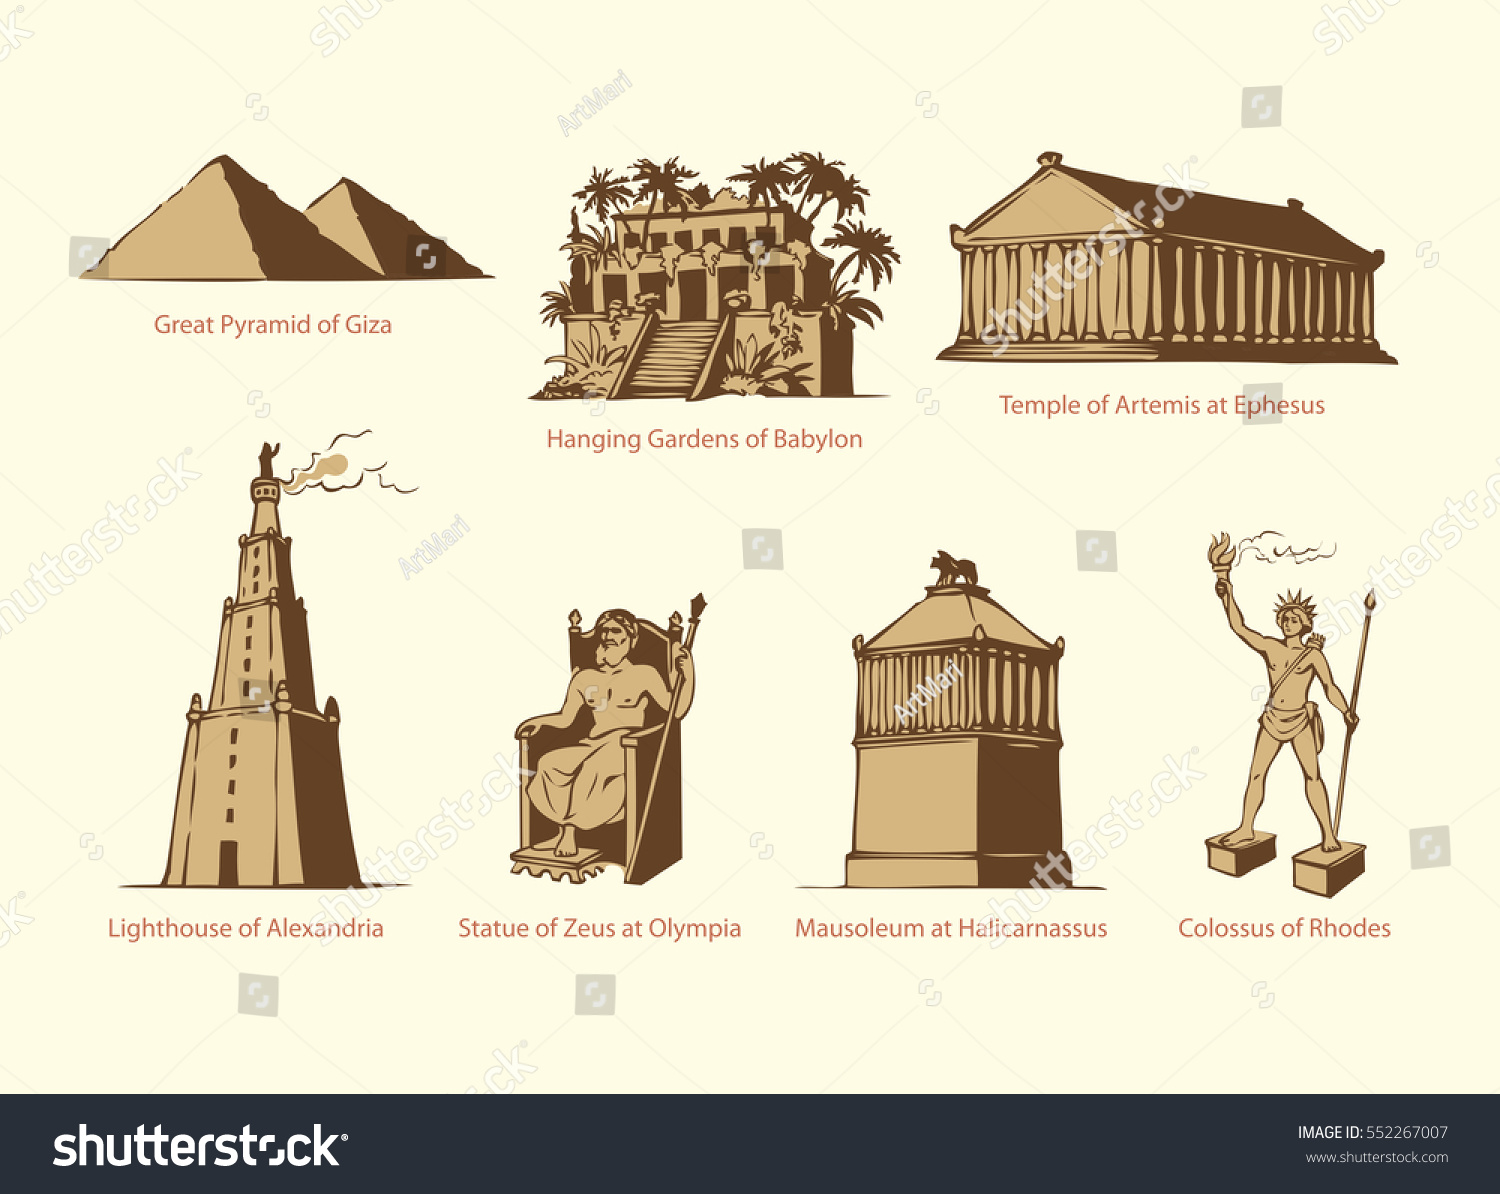 SVG of Seven Wonders of WORLD. Pyramid of Giza, Hanging Gardens of Babylon, Temple of Artemis at Ephesus, Lighthouse of Alexandria, Statue of Zeus at Olympia, Mausoleum at Halicarnassus, Colossus of Rhodes svg